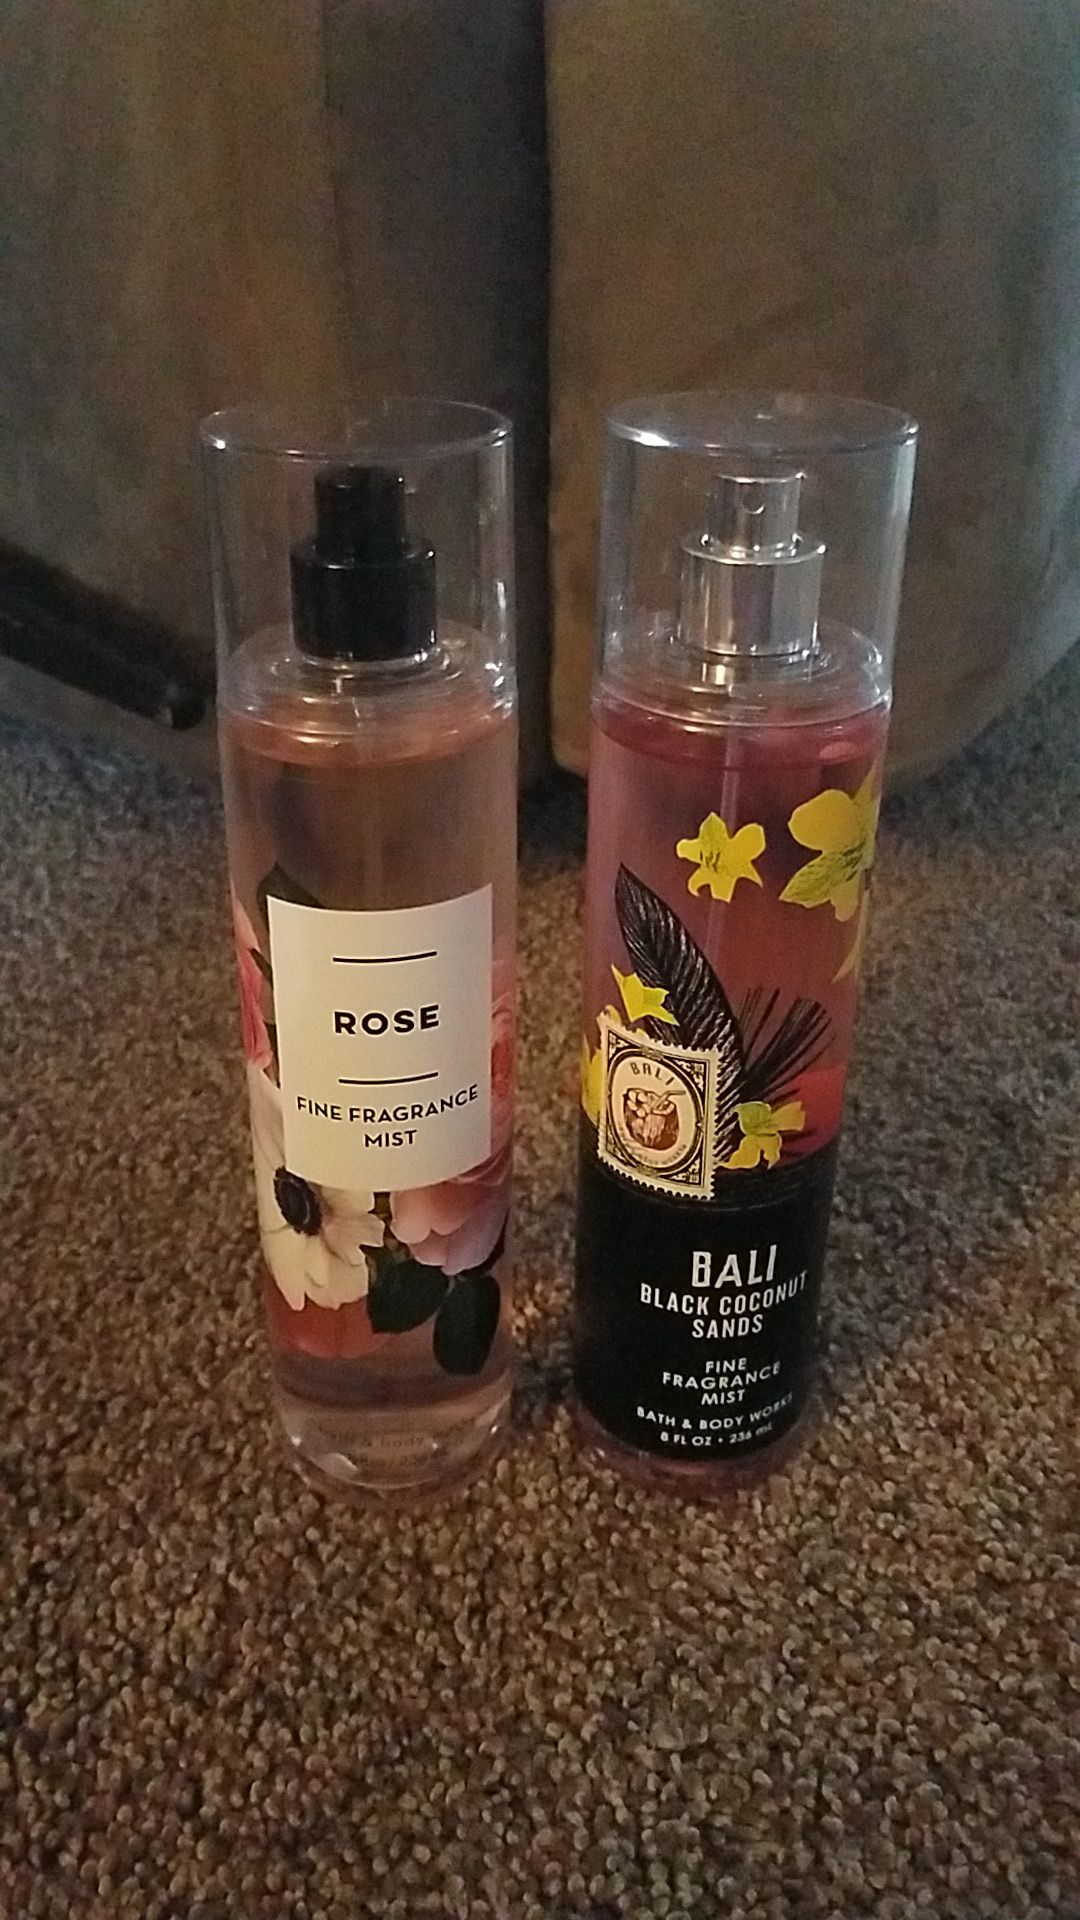 Bath and Body Works - BALI Black Coconut Sands and ROSE fragrances